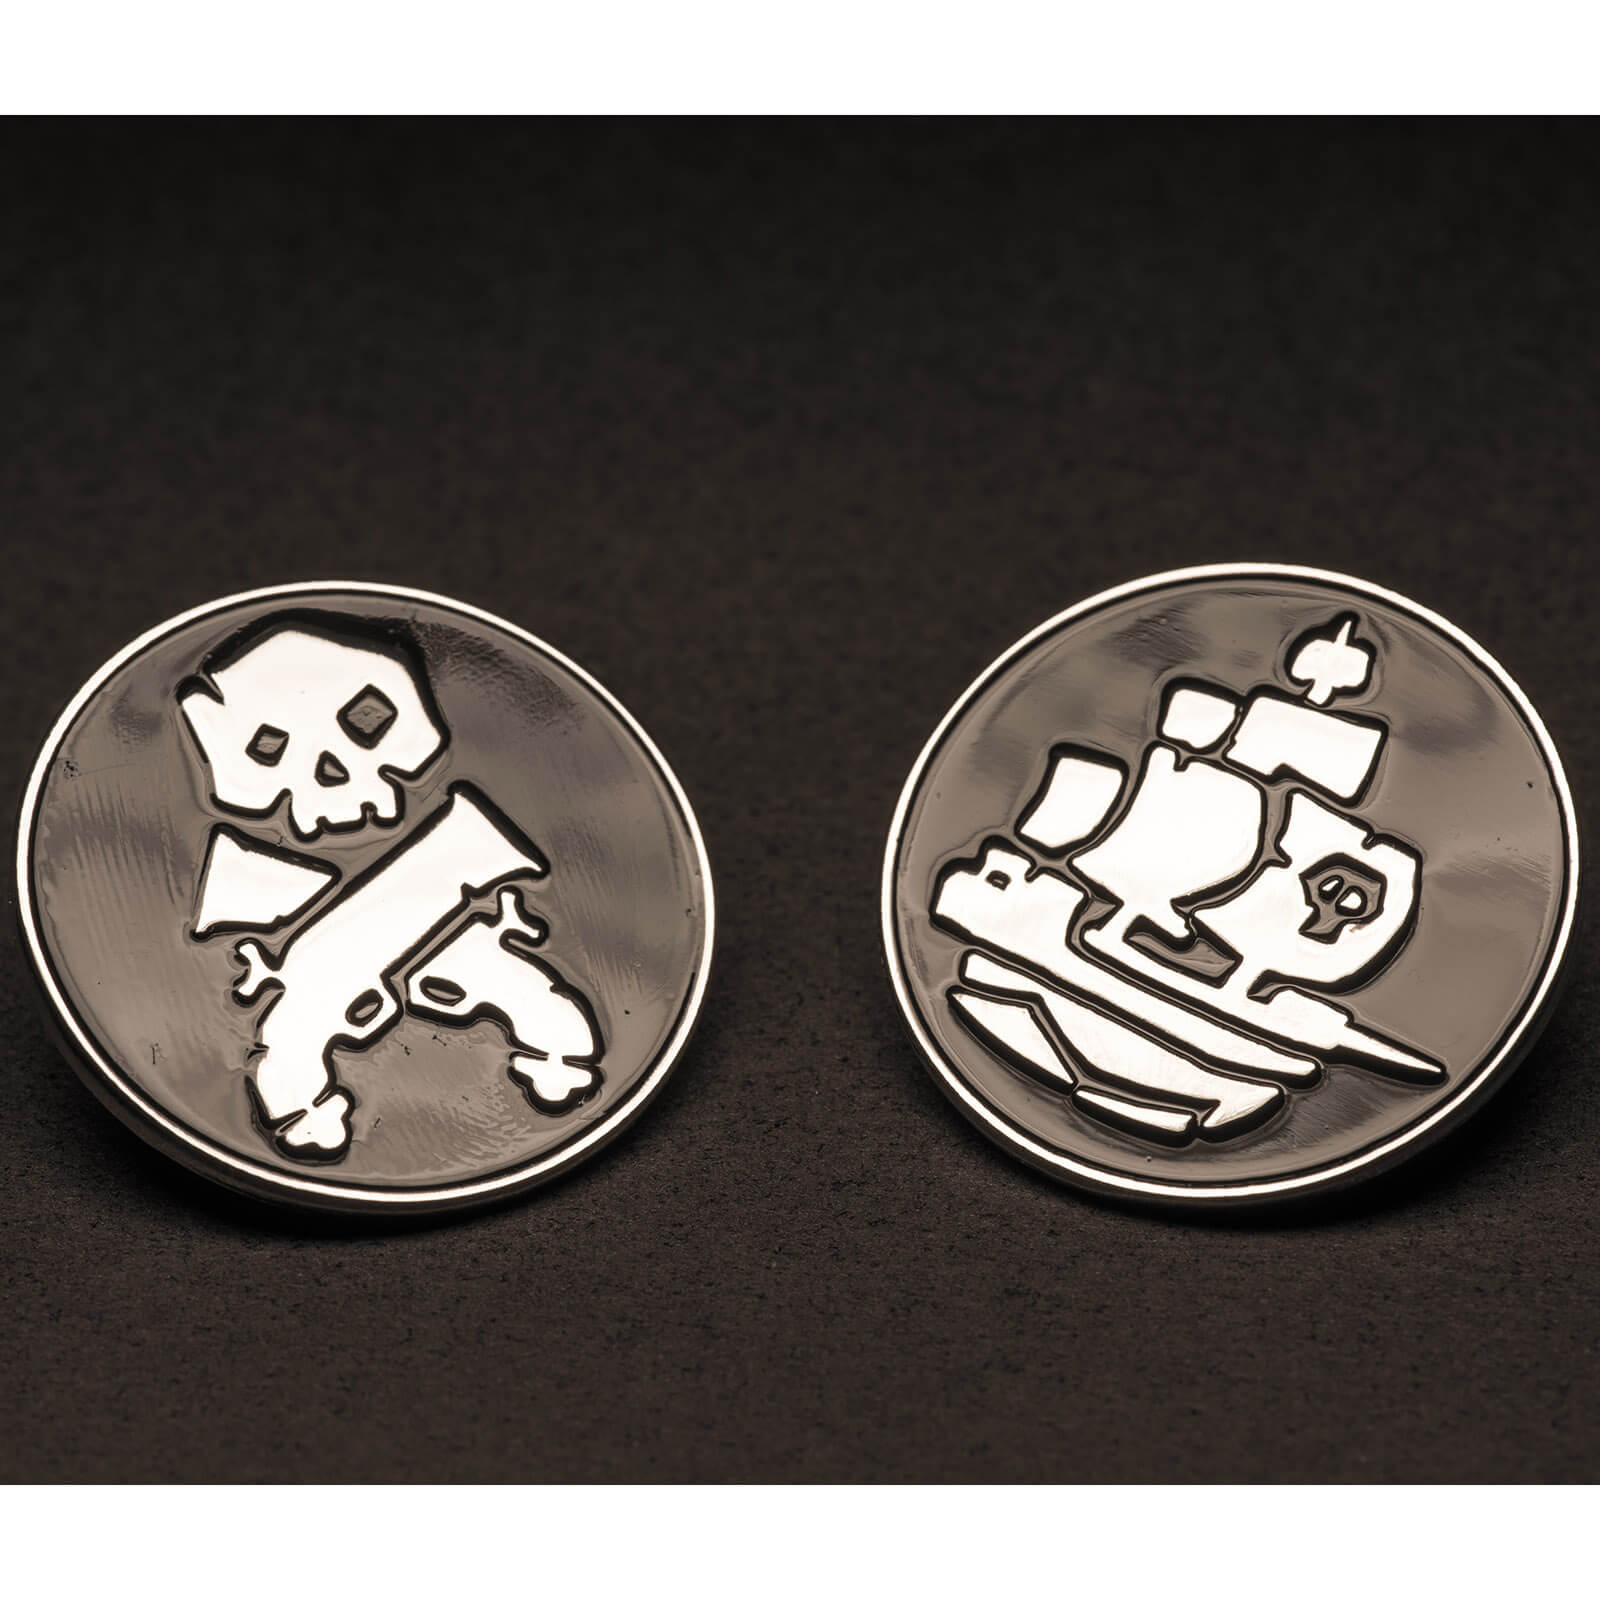 Photos - Other Toys Sea of Thieves Limited Edition Pin Badge Set SEA12